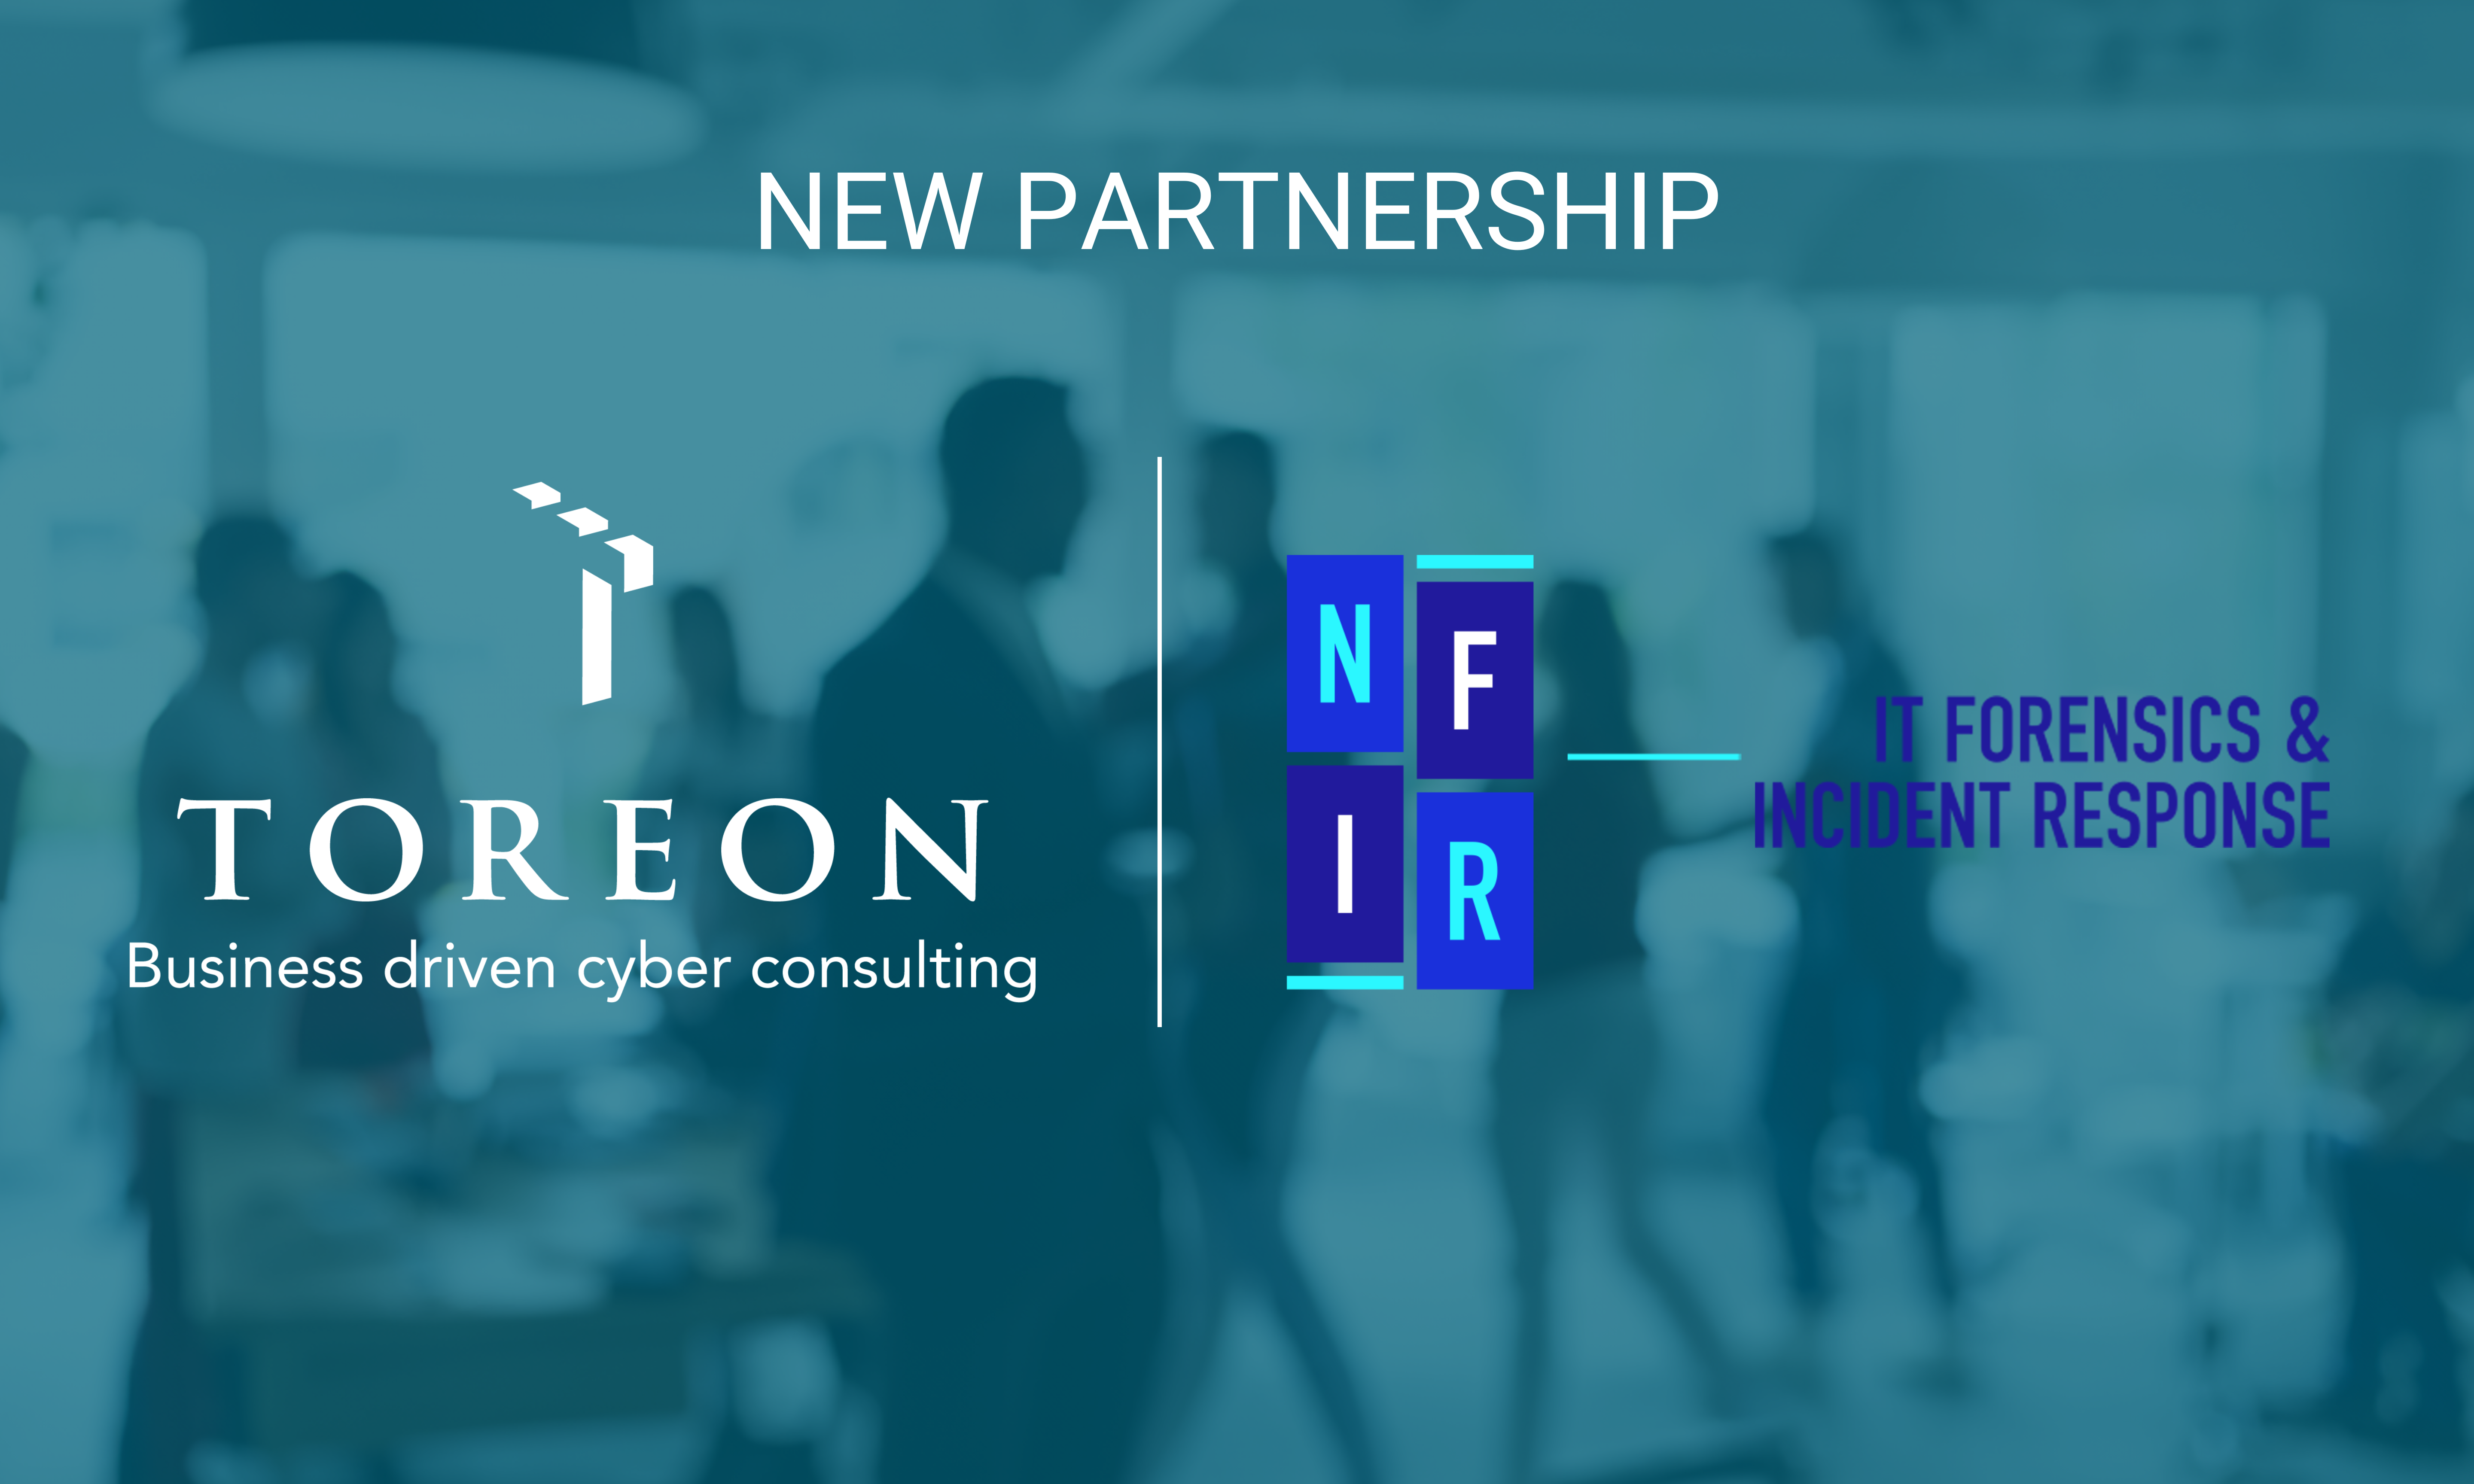 Toreon Partners with NFIR to Bring Incident Response Services to its clients in digital development, healthcare and industry